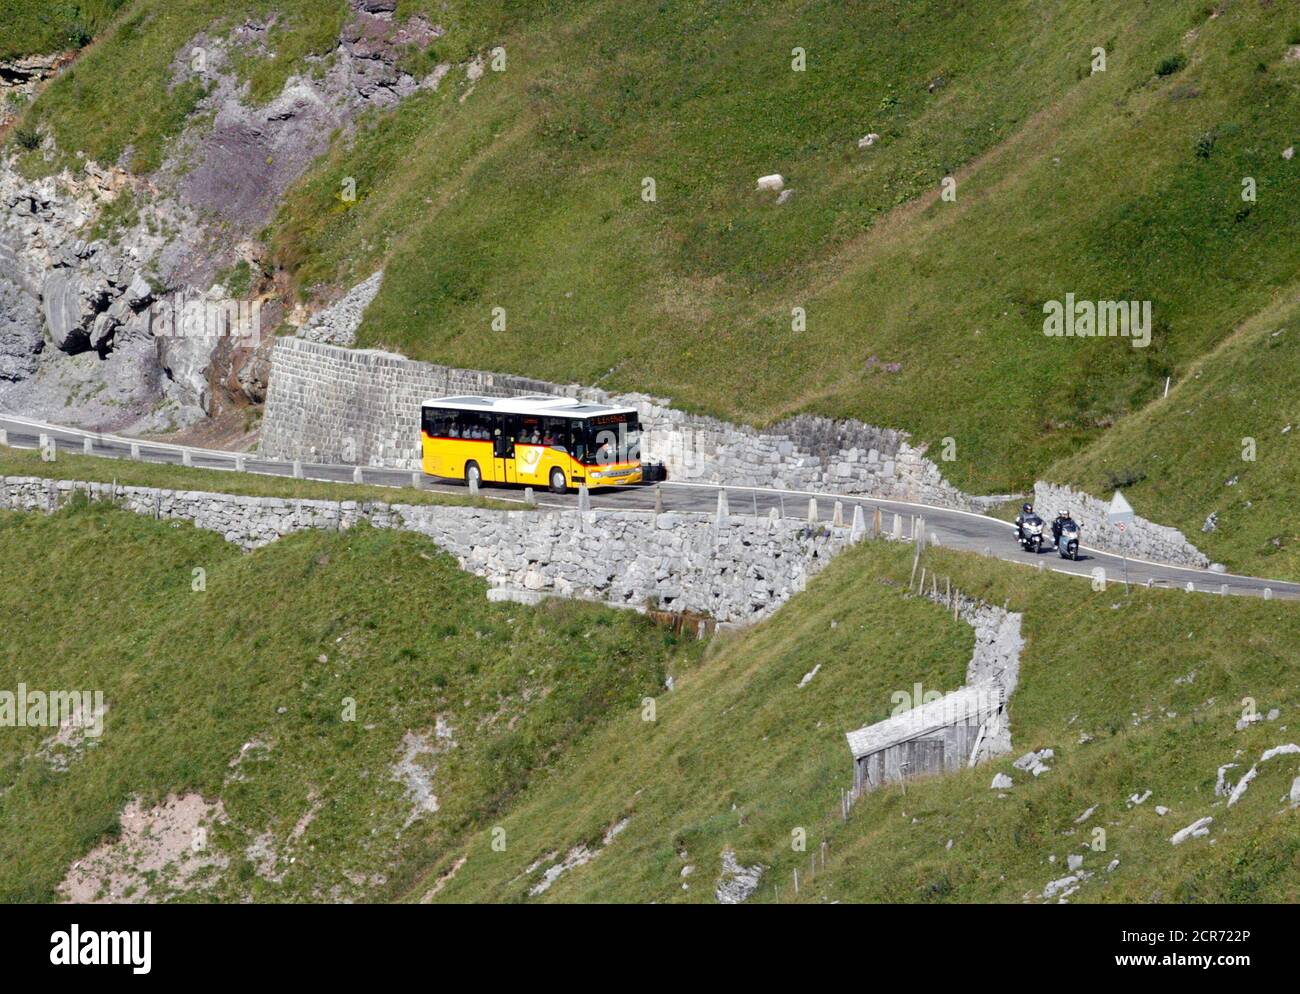 A Swiss Postauto bus drives past on the Klausenpass mountain pass, 1,952 m  (6,404 ft) in the Swiss Alps August 19, 2009. The bus transport of Switzerland's  post is leading in the